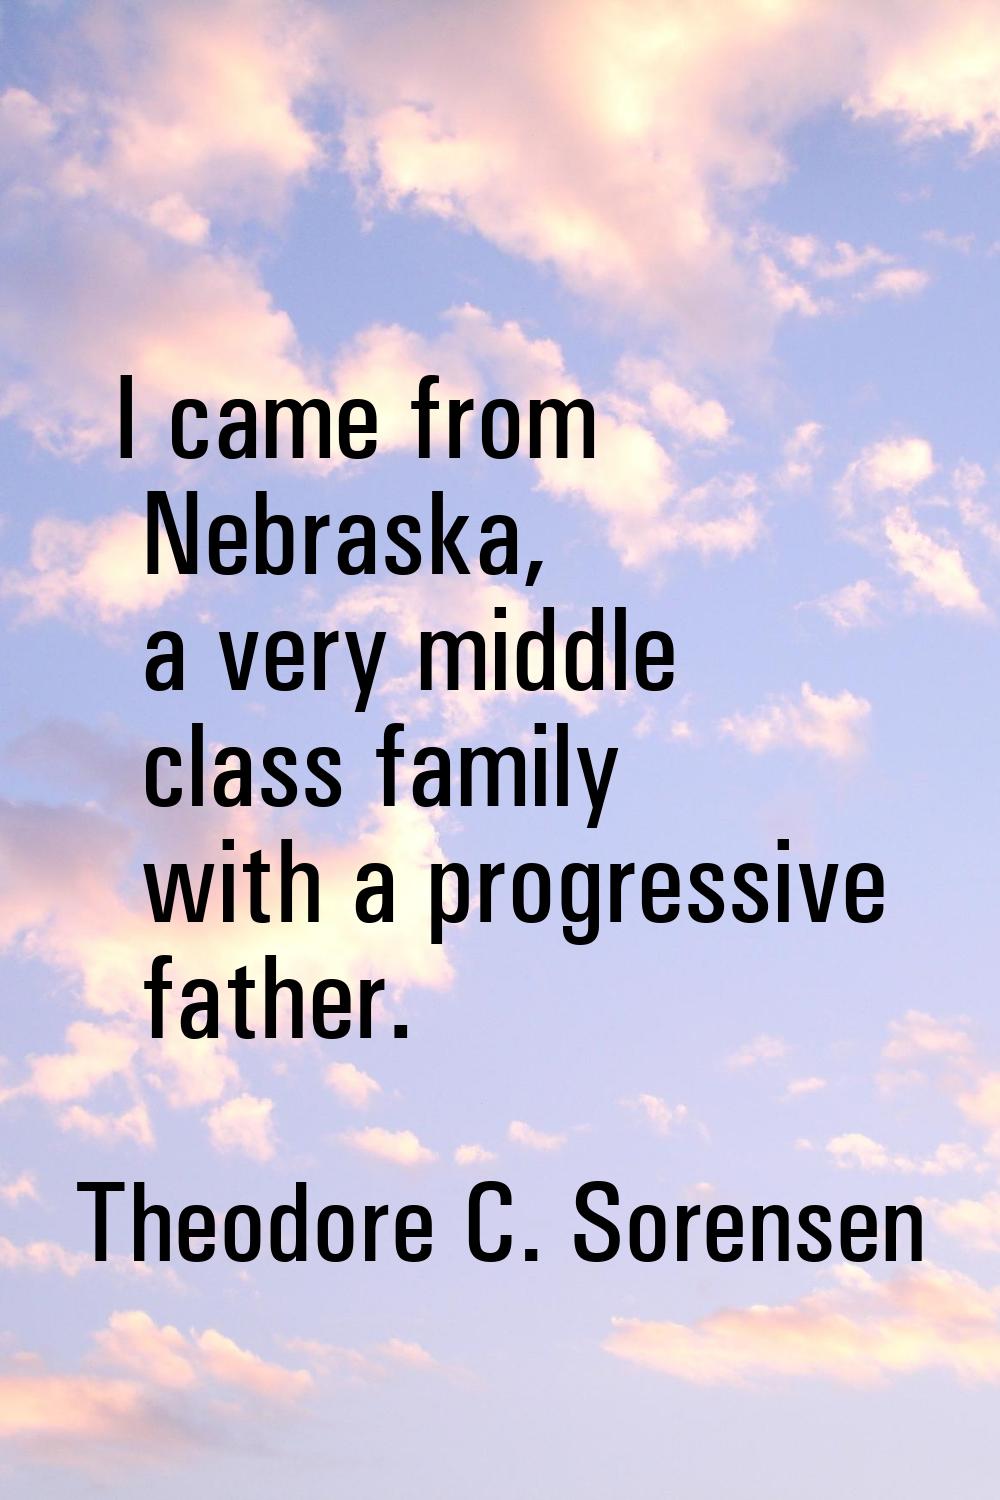 I came from Nebraska, a very middle class family with a progressive father.